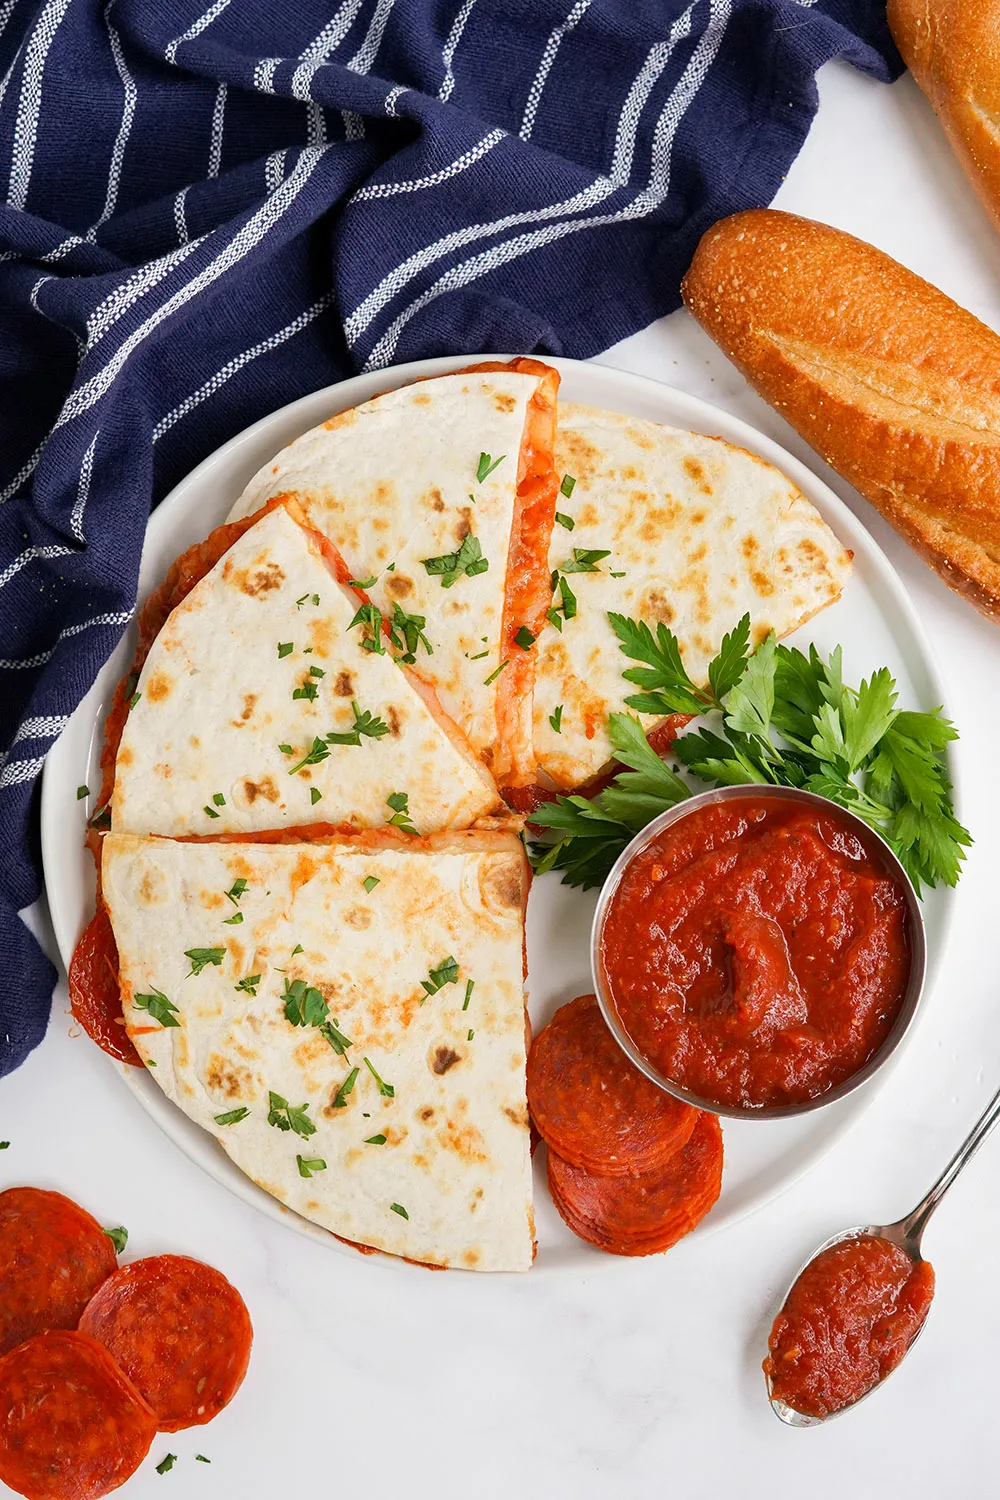 Quesadillas on a plate with sauce, meat, and loaves of bread.